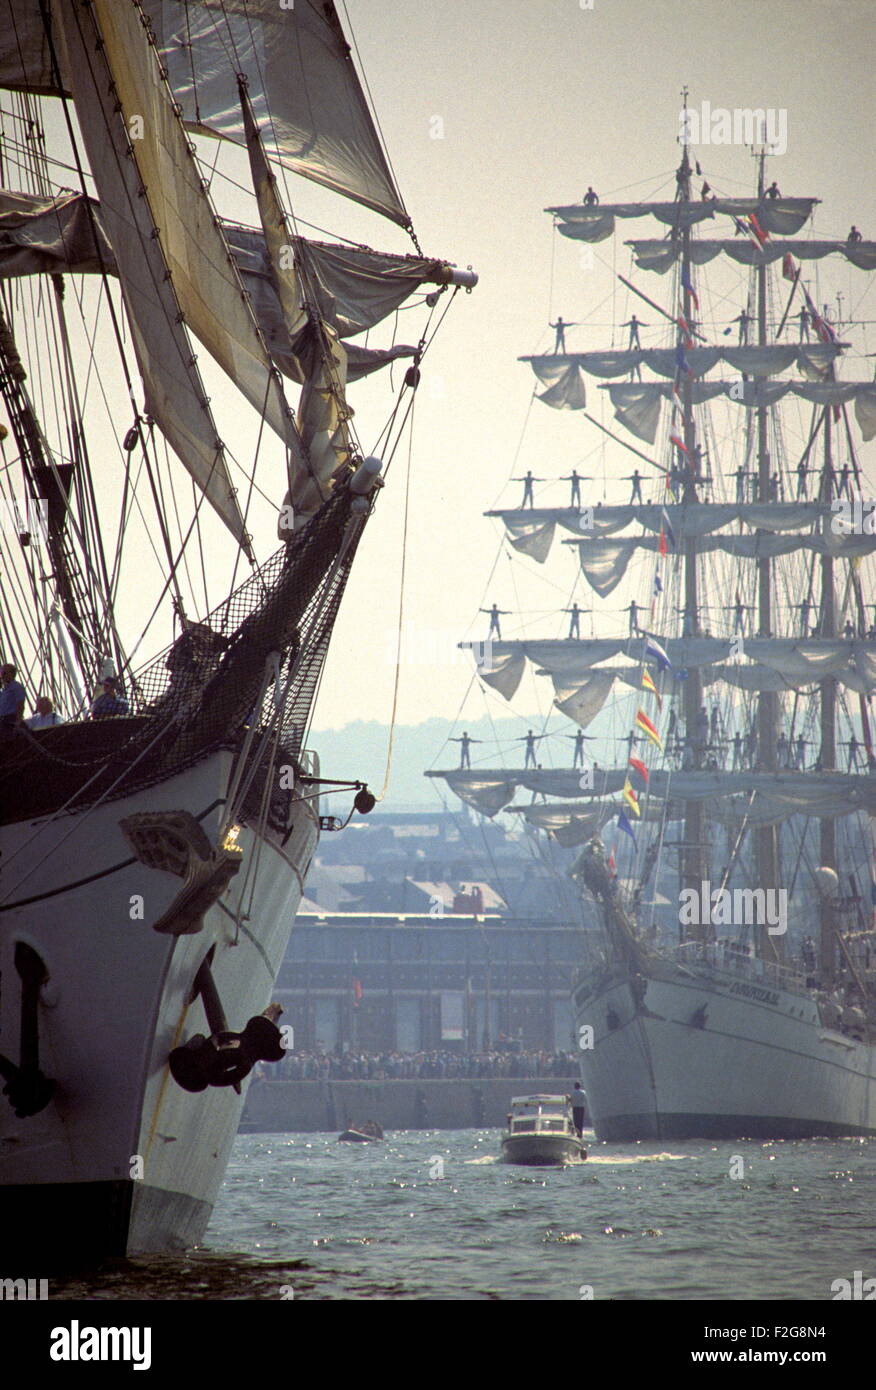 AJAX NEWS PHOTOS - JULY,1989. ROUEN, FRANCE - TALL SHIPS ON THE SEINE - VOILE DE LA LIBERTE - THE GERMAN SAIL TRAINING SHIP GORCH FOCH LEADS MEXICO'S CHUATEMOC IN THE PARADE OF SAIL. PHOTO:JONATHAN EASTLAND/AJAX REF:22506 1 44 Stock Photo